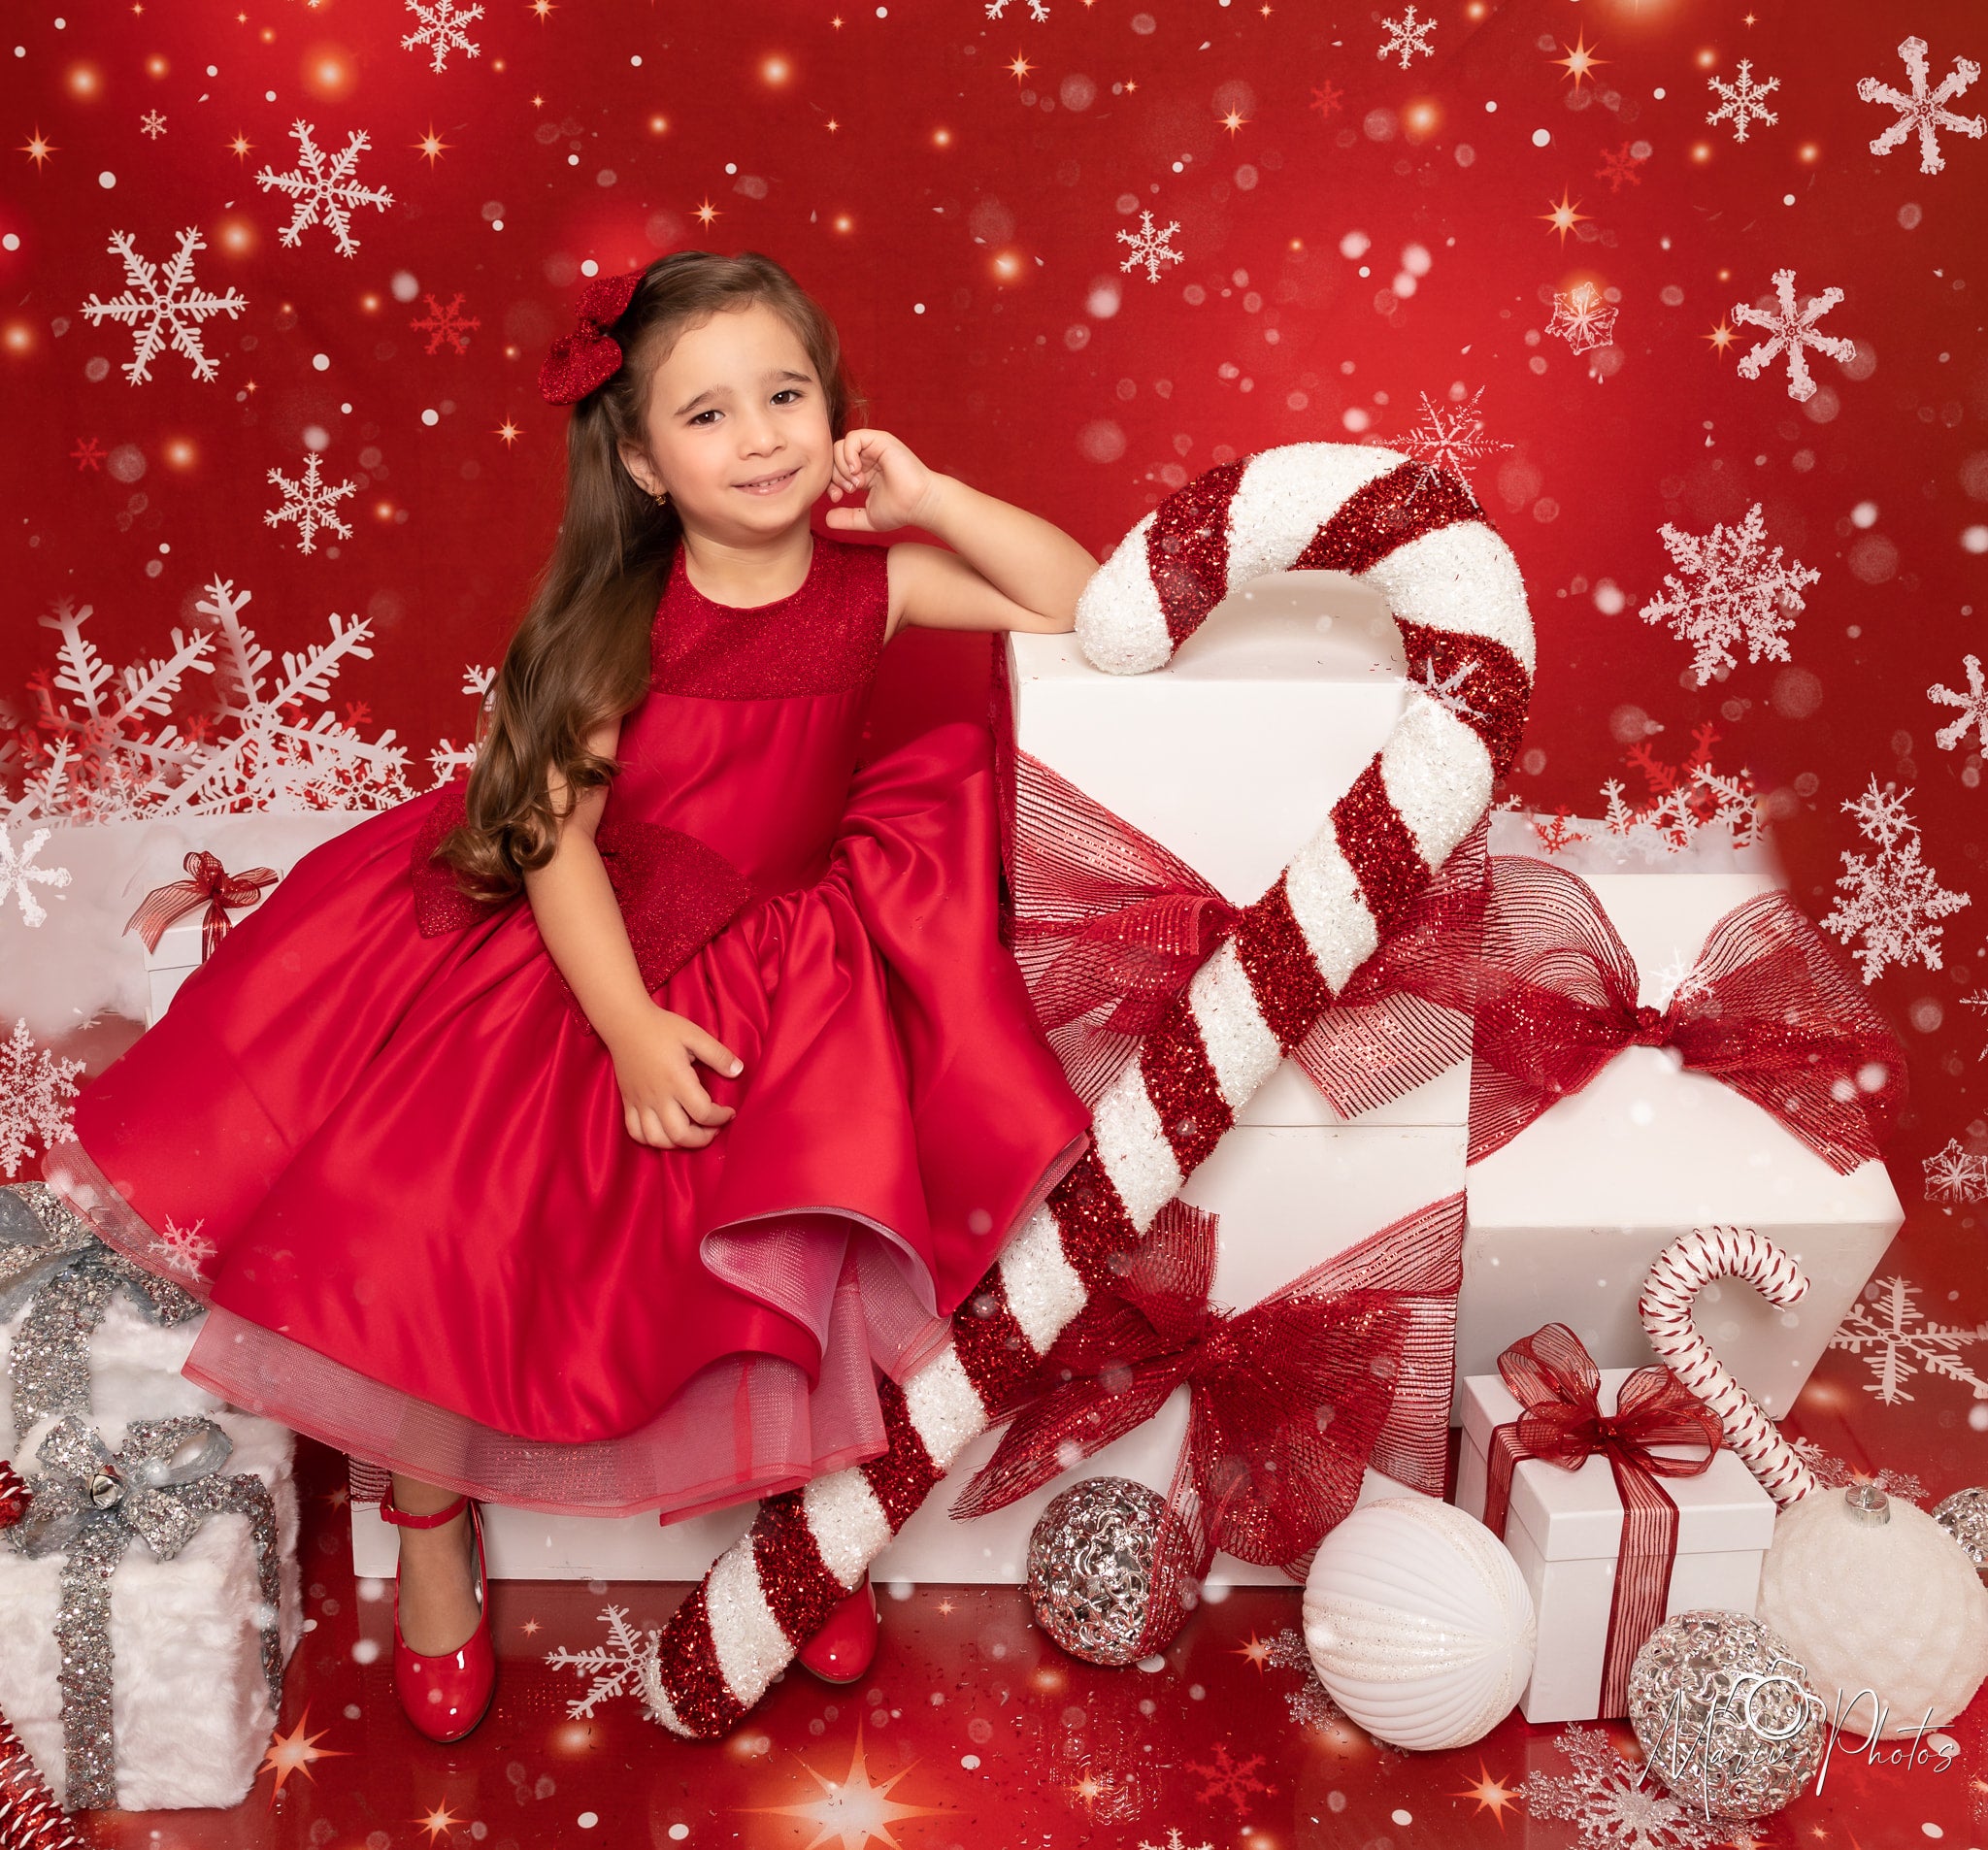 Kate Red Wall Background Snowflake Marry Christmas Backdrops